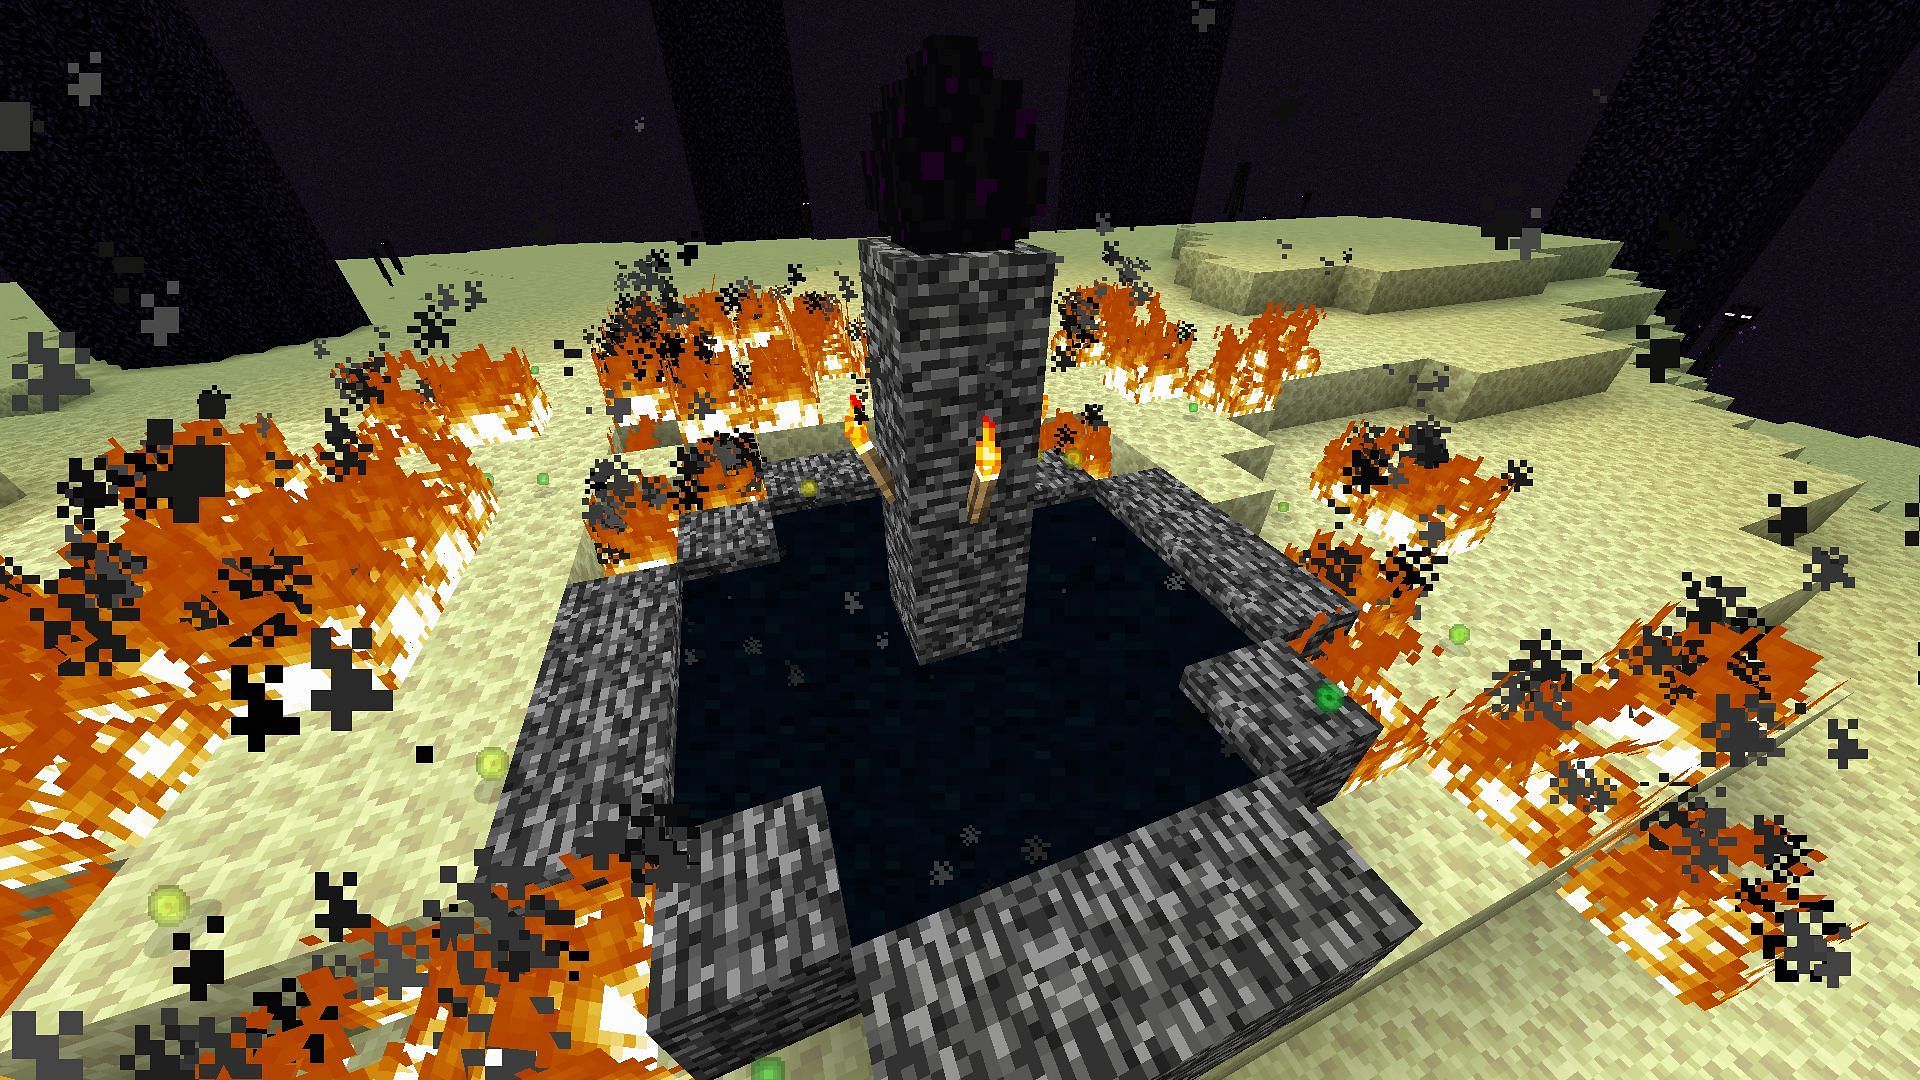 End portal generated at the middle (Image via Minecraft)